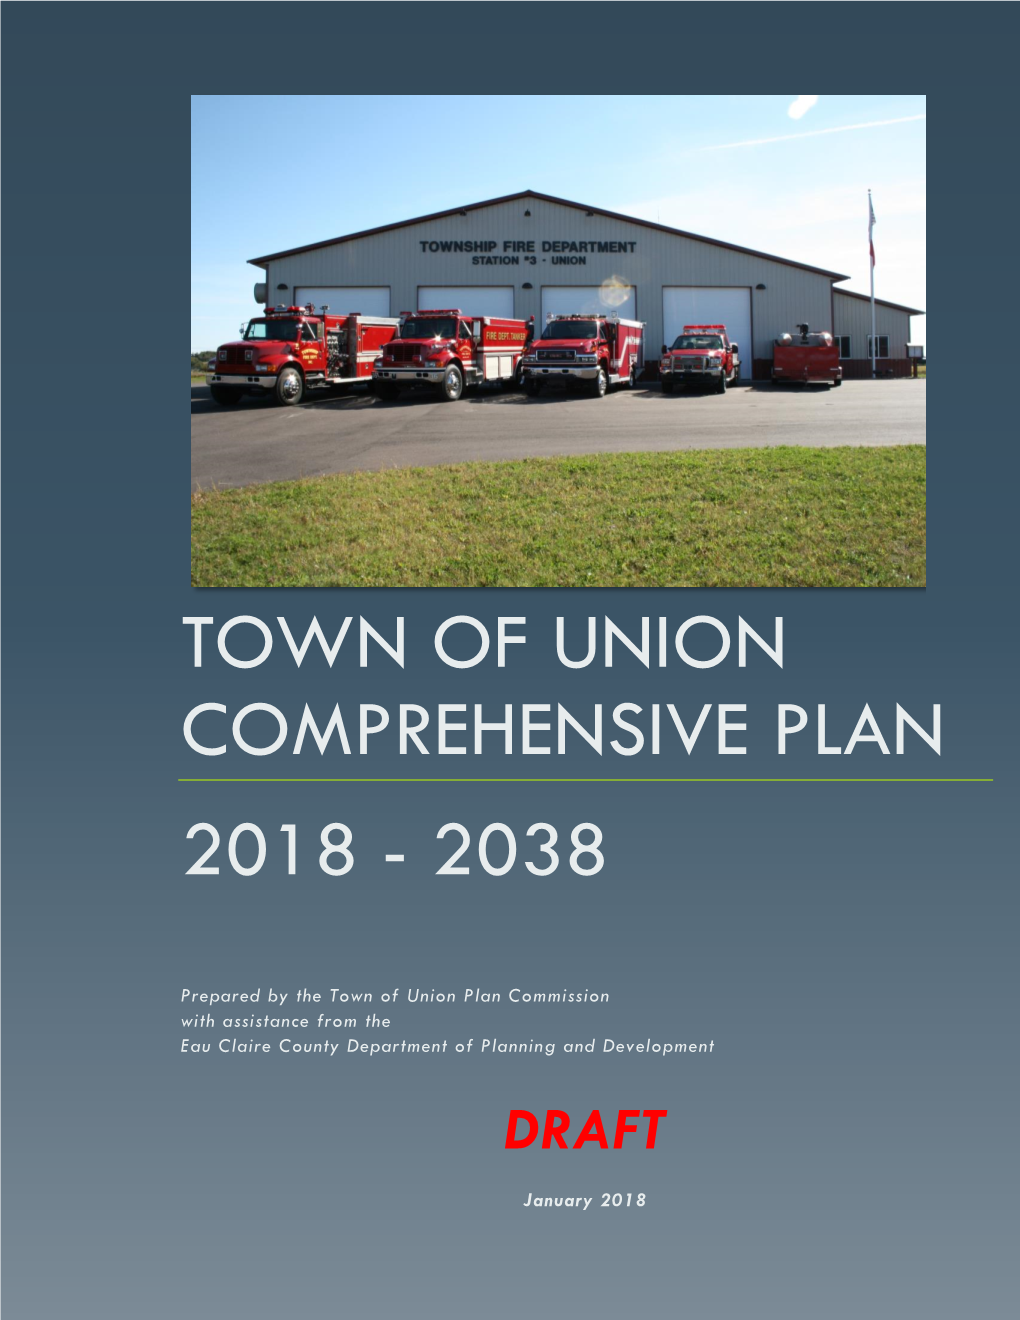 Town of Union Comprehensive Plan 2018 - 2038